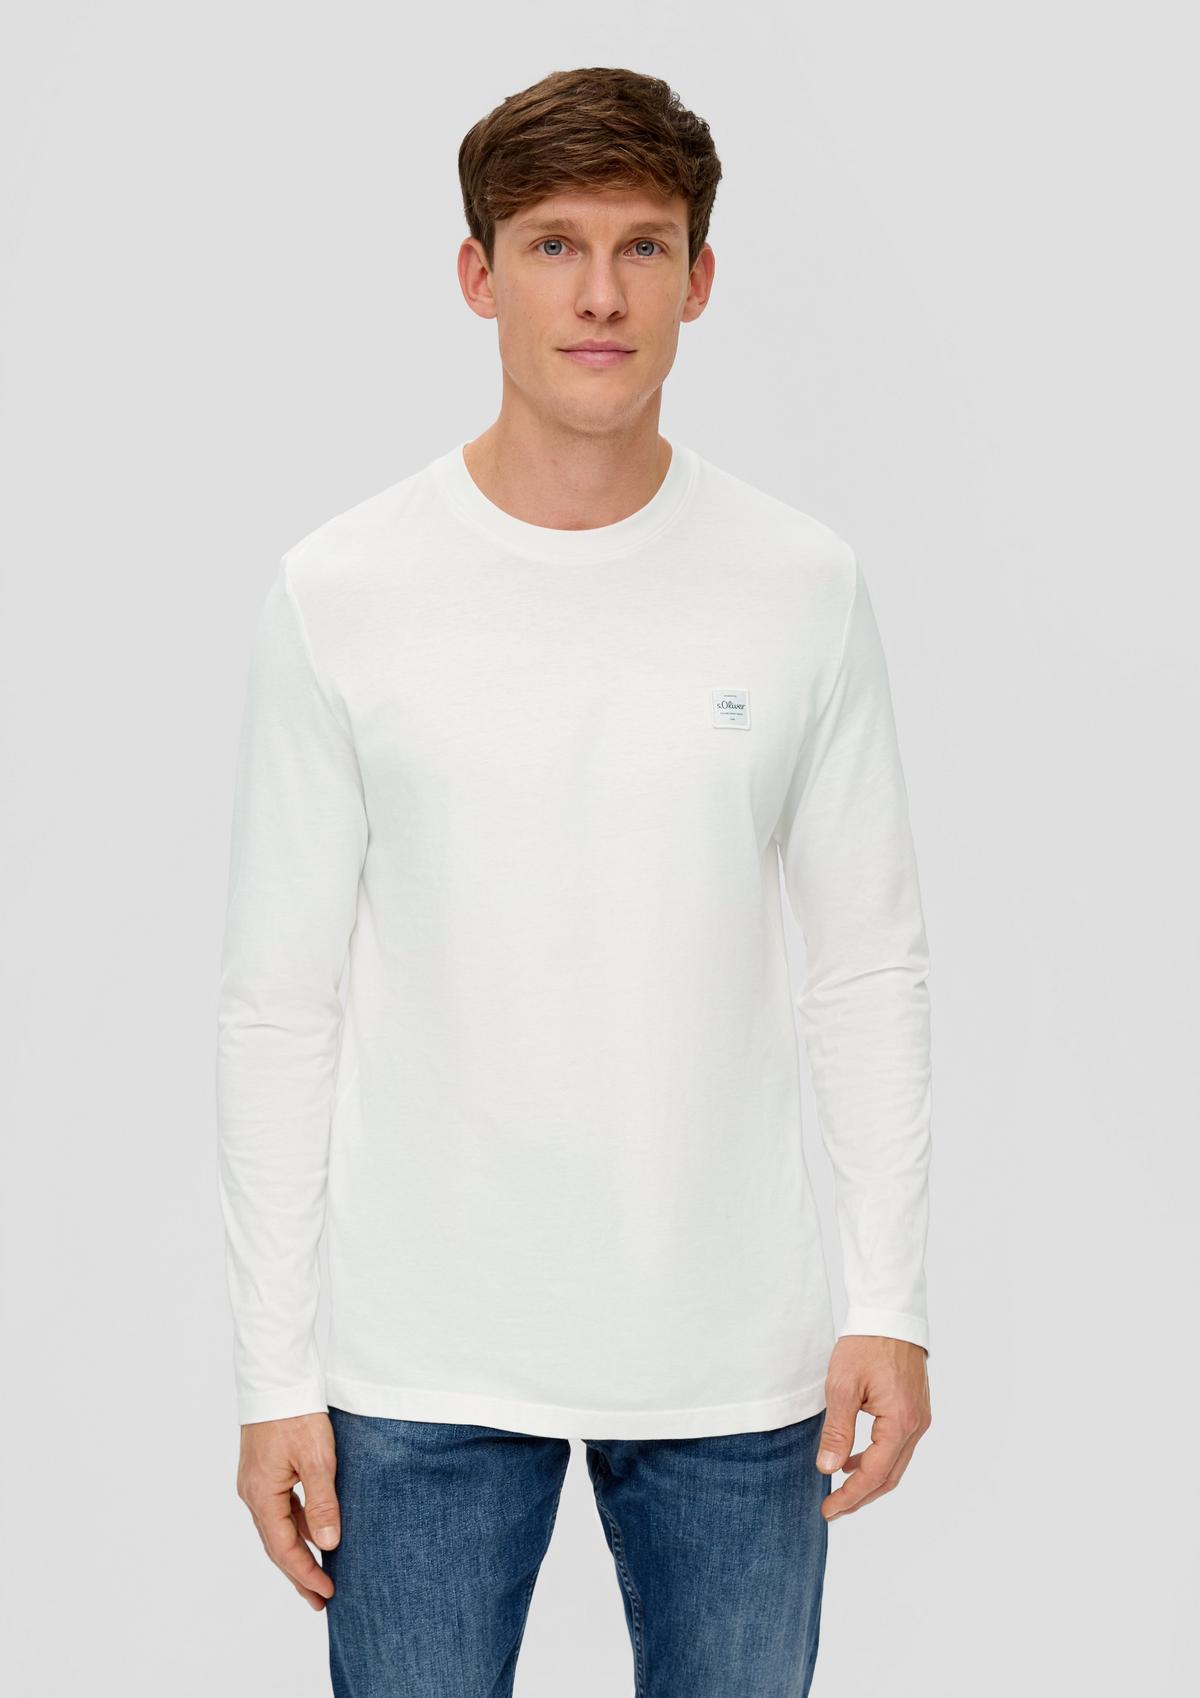 Long sleeve top made of pure cotton